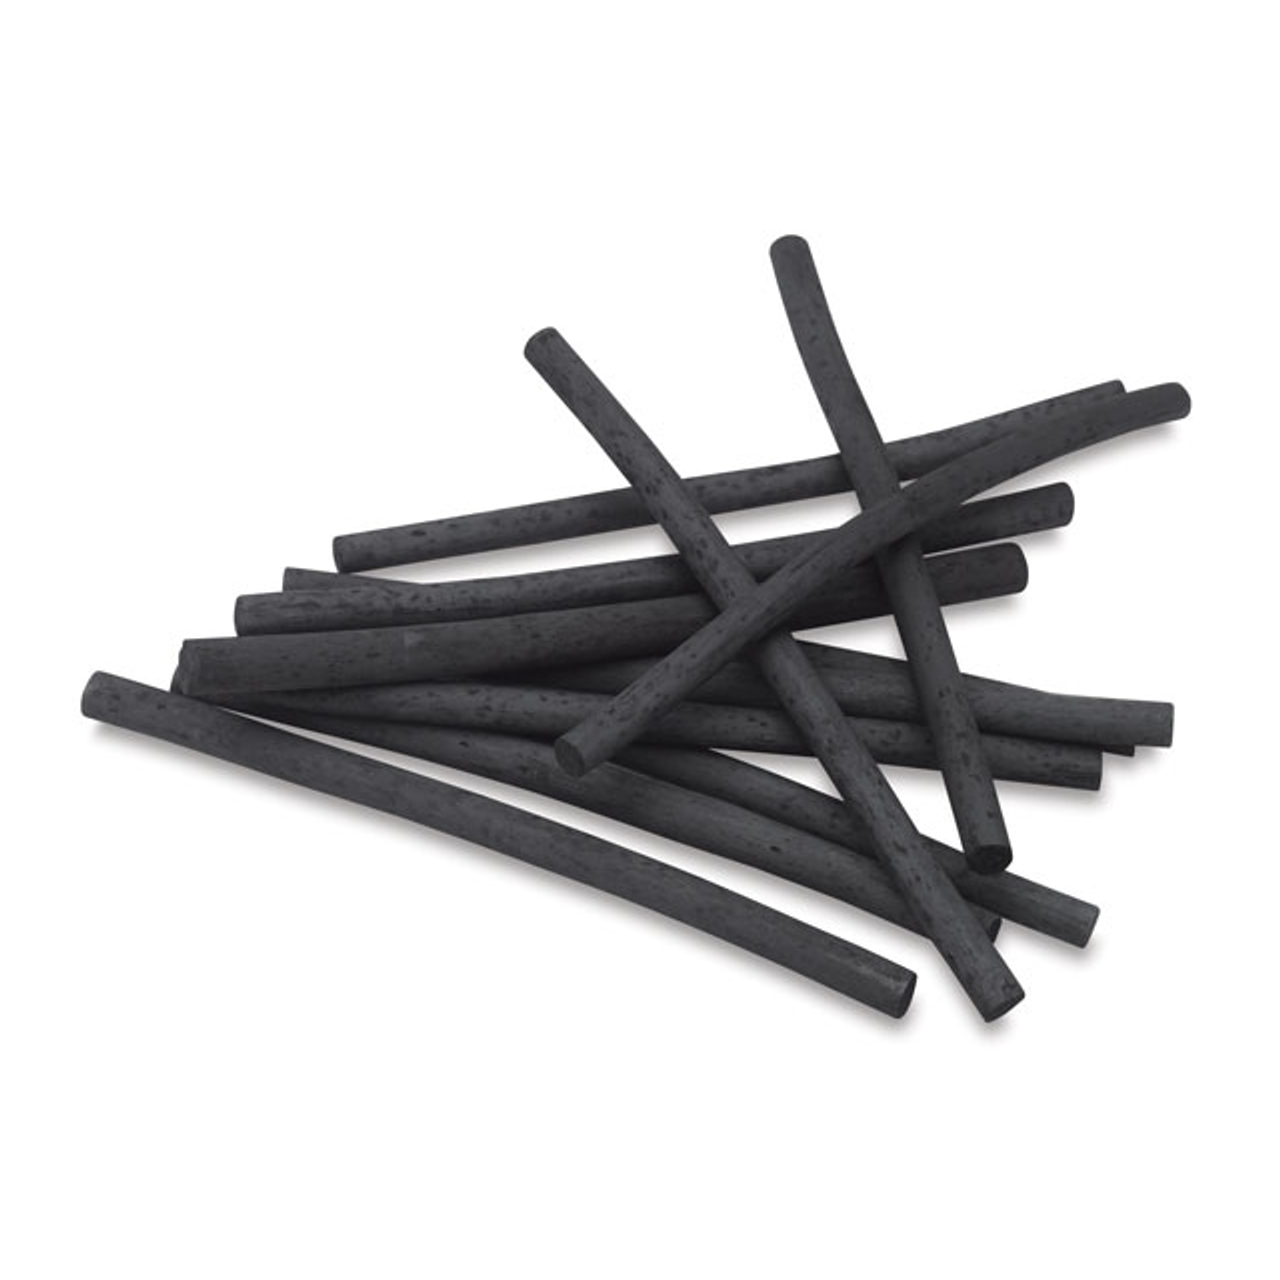 EXCEART 6pcs Sketch Carbon Square Bars Willow Charcoal Art Charcoal Sticks  Dark Charcoal Sticks Sketch Charcoal Willow Vine Black Outfit Black Suits